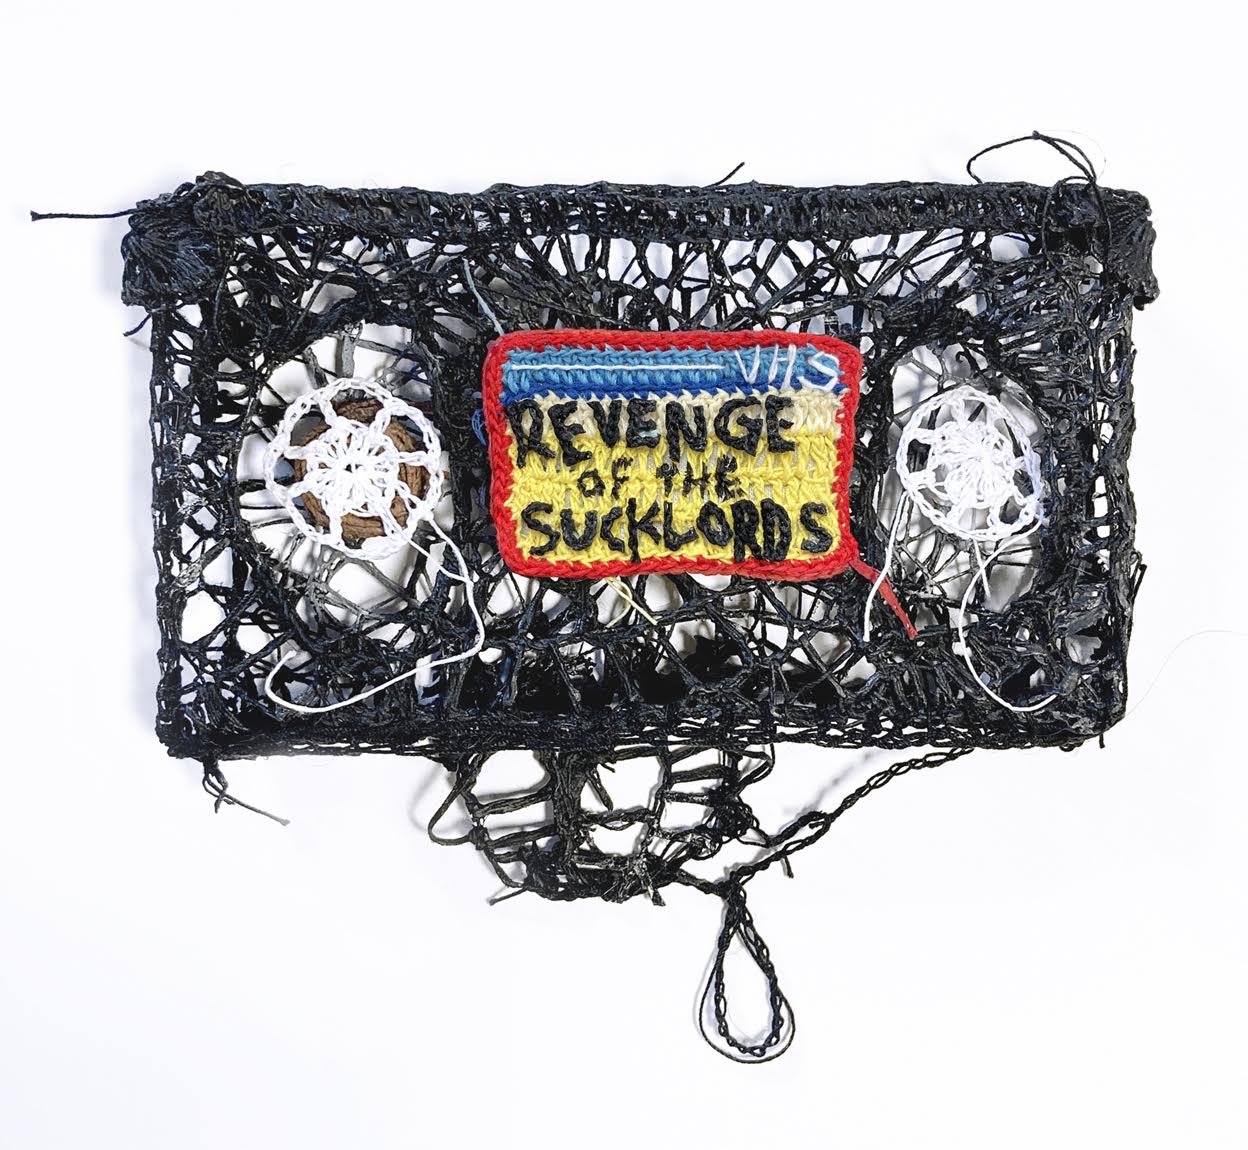 Caitlin McCormack, "Revenge of the Sucklords"